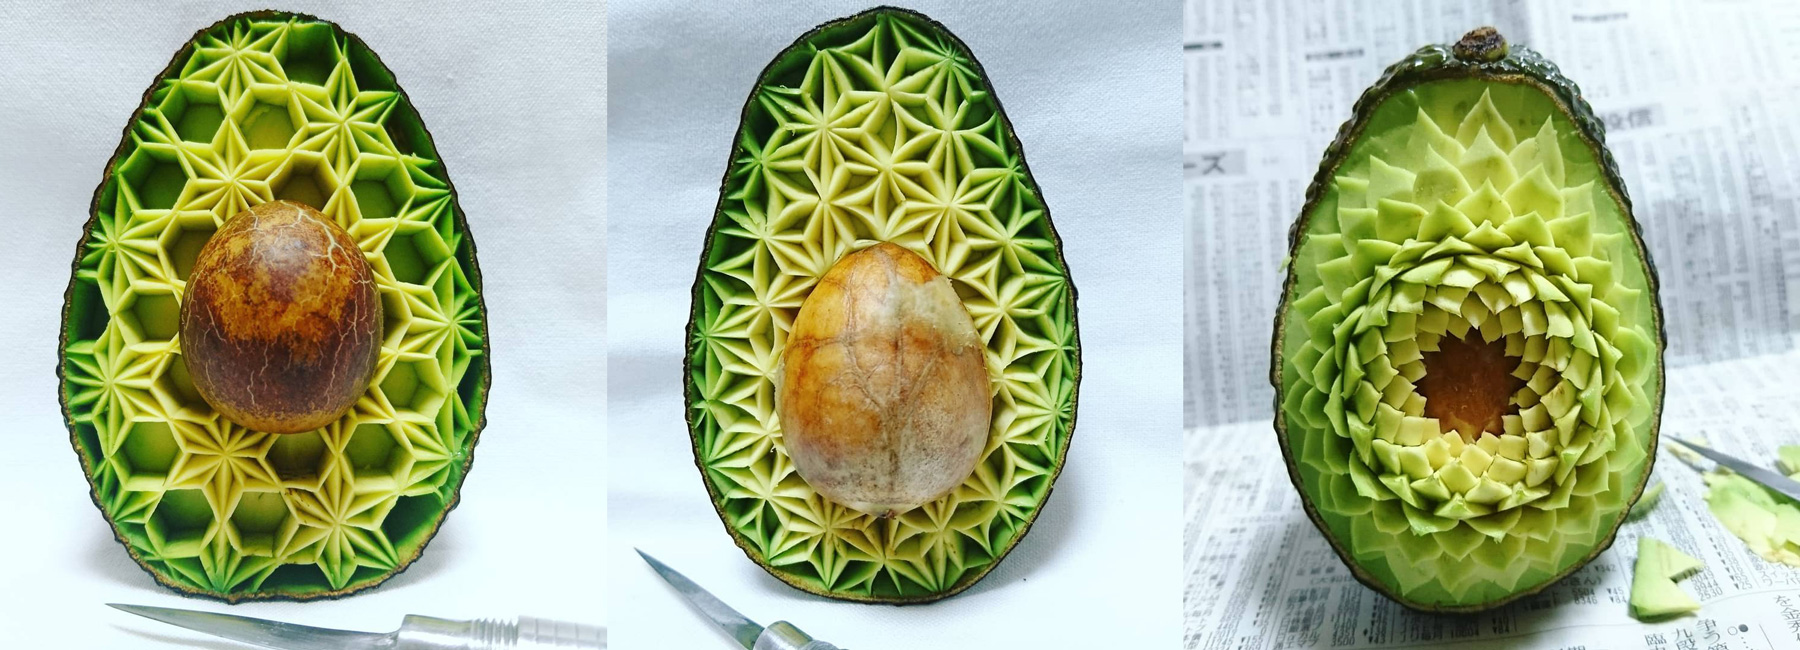 food carver 'gaku' transforms fruit and vegetables into edible masterpieces